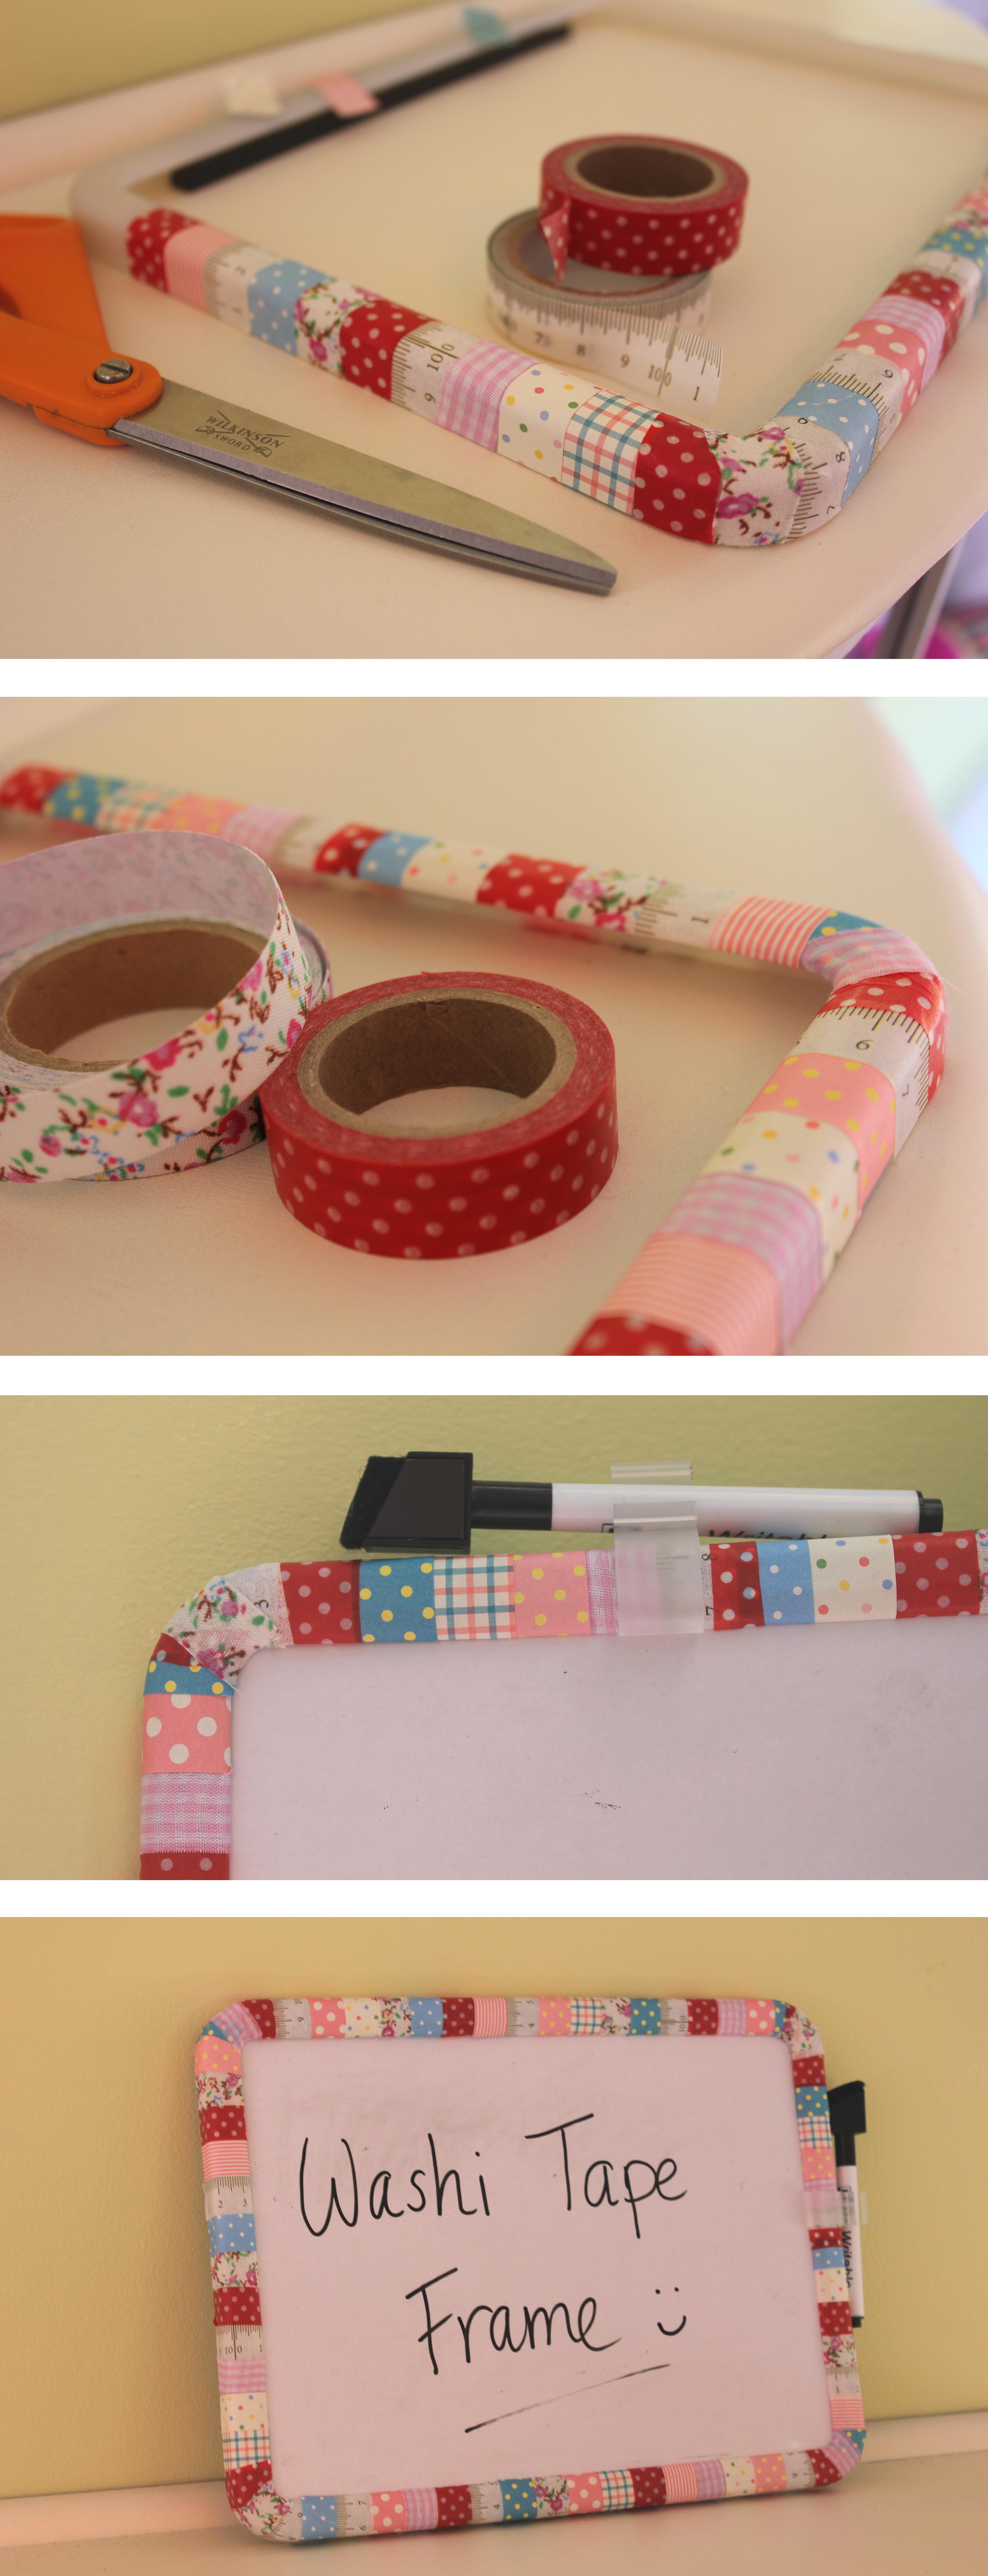 craft DIY upcycle masking washi tape whiteboard photo picture frame by cassiefairy